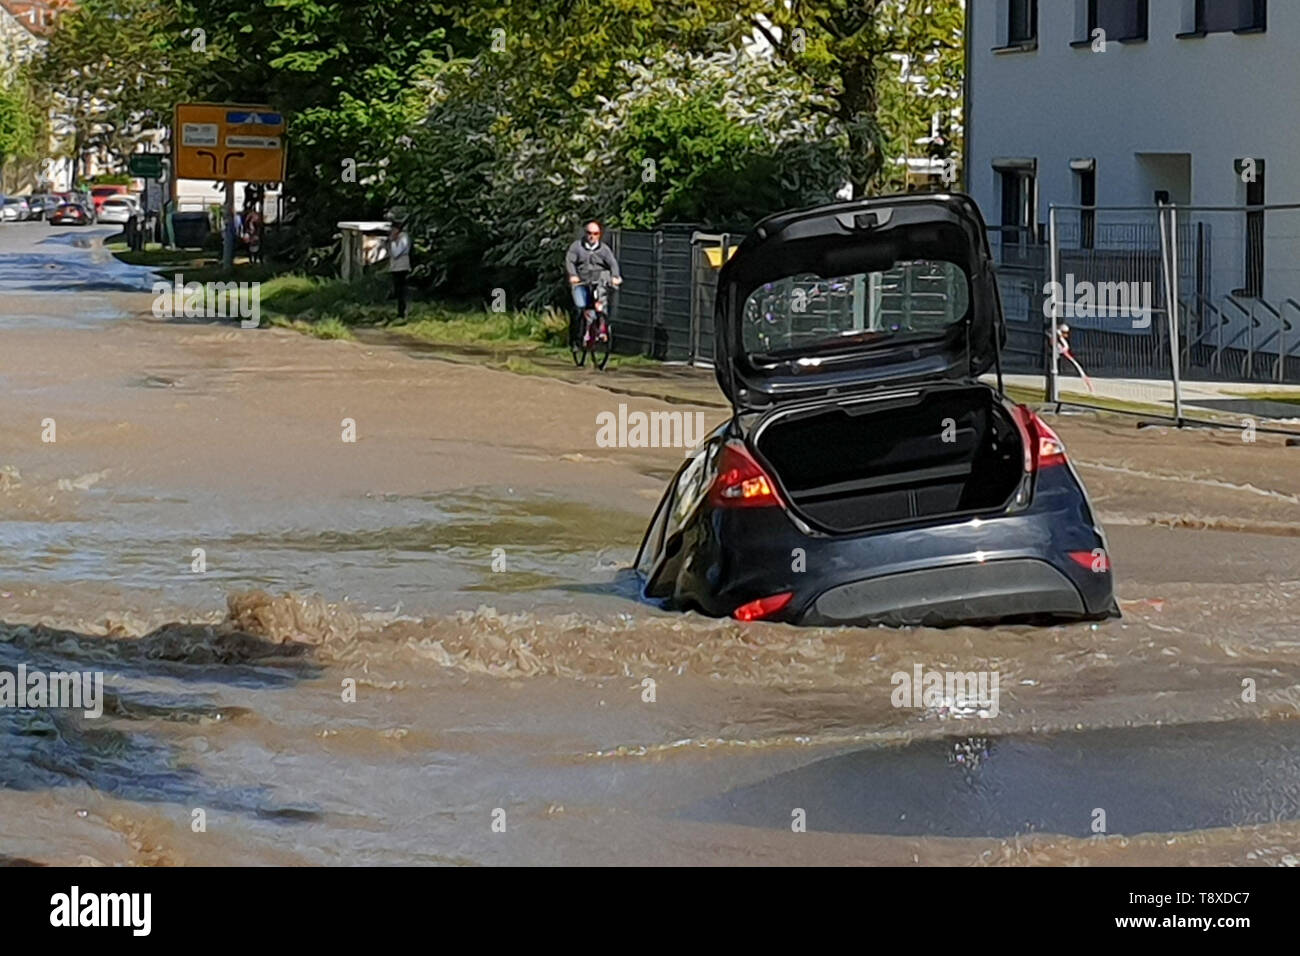 Rostock, Germany. 15th May, 2019. A car is stuck in a hole in a road after  a burst water pipe. Due to a burst water pipe on Wednesday in the east of